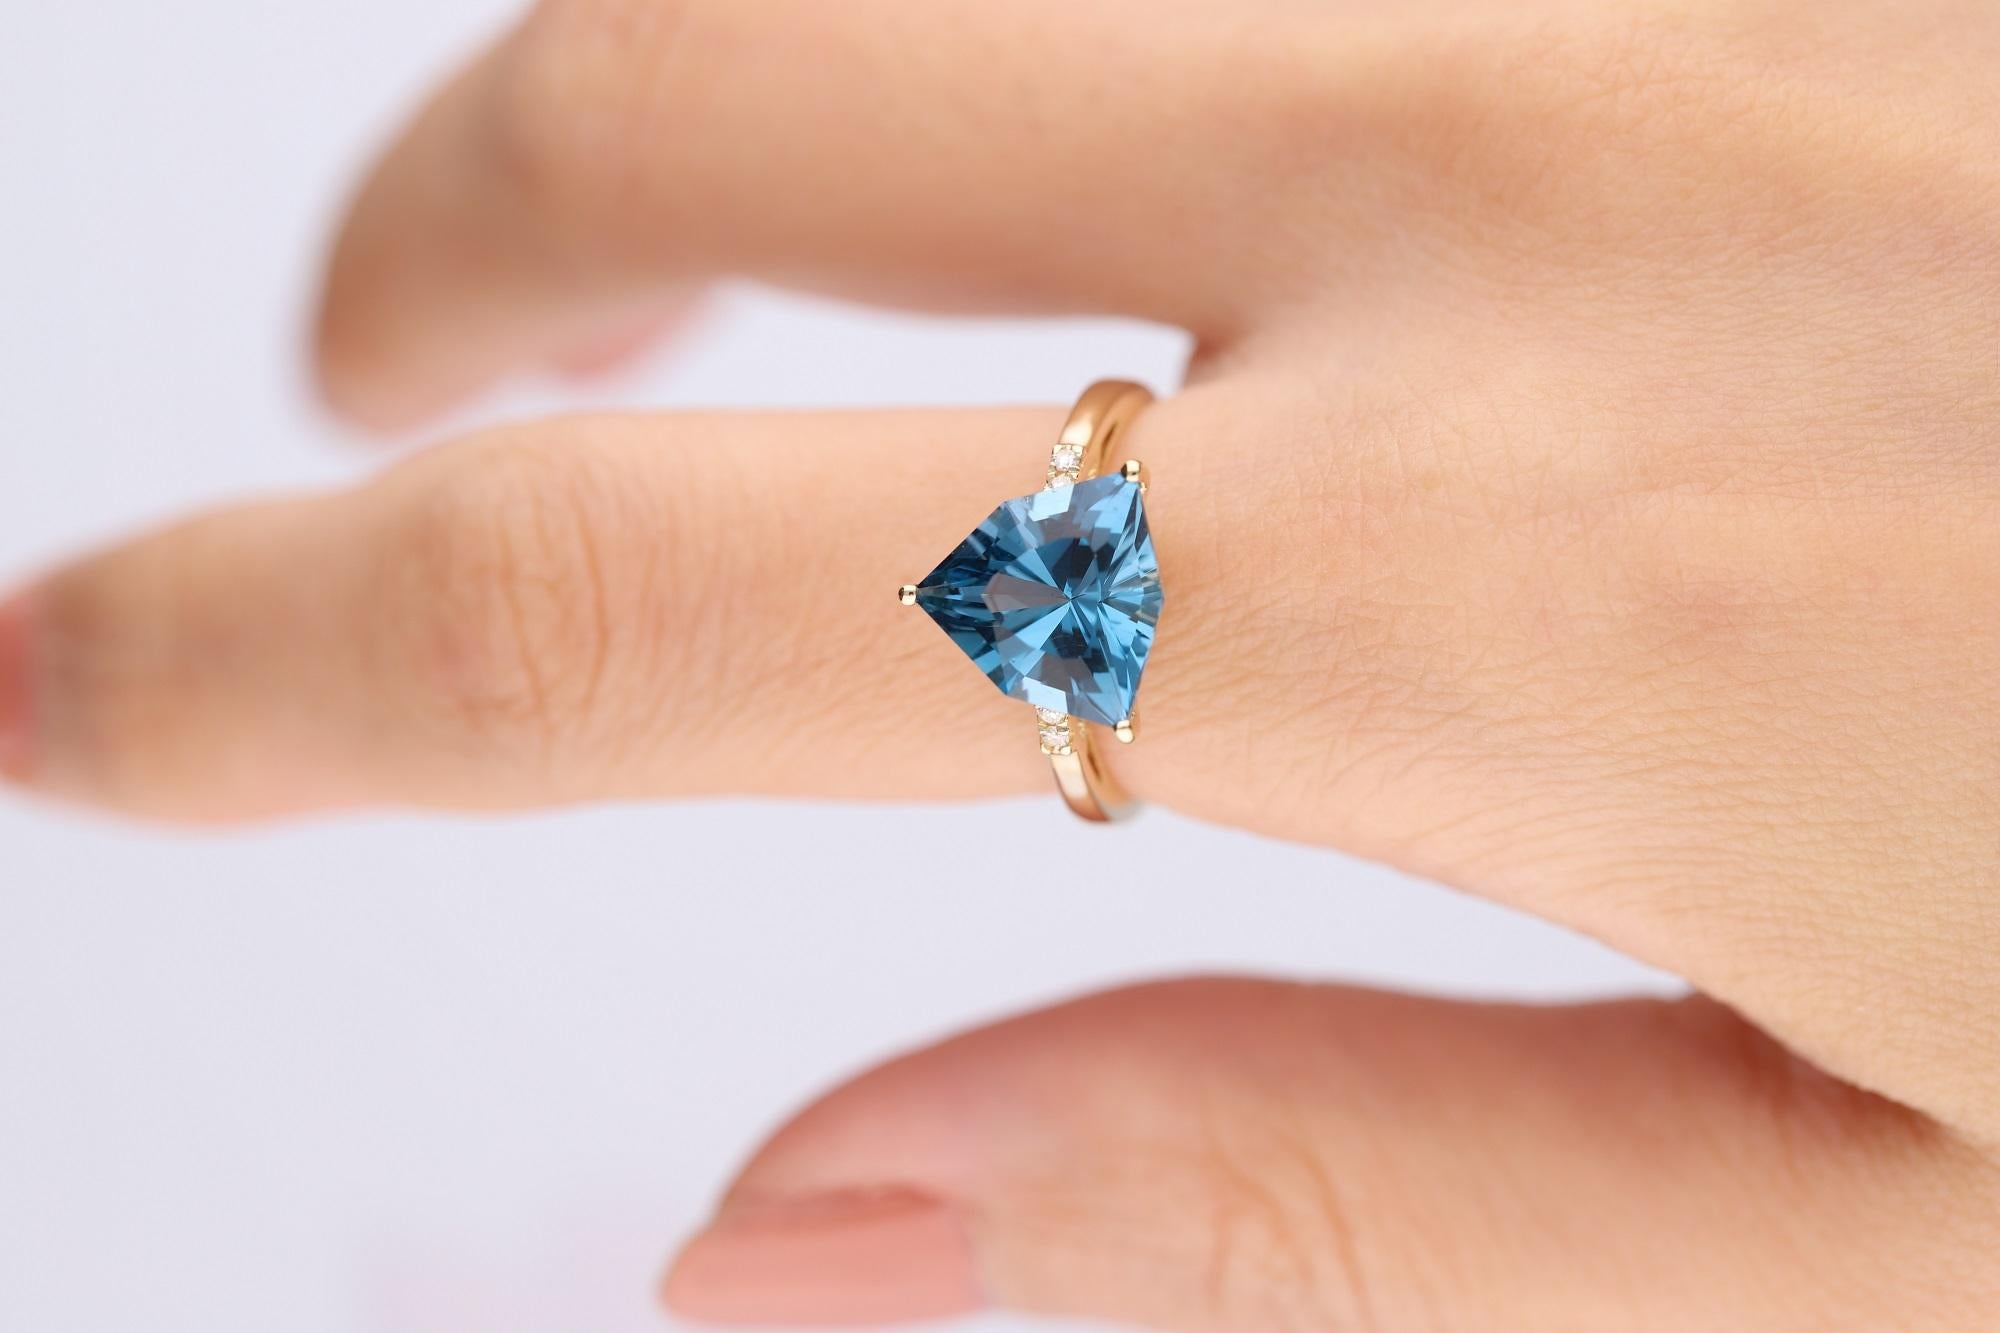 Stunning, timeless and classy eternity Unique ring. Decorate yourself in luxury with this Gin & Grace ring. The 14k Yellow Gold jewelry boasts Fancy-cut Trillion London Blue Topaz (1 pcs) 4.33 Carat and Round-Cut Diamond (4 pcs) 0.03 Carat accent